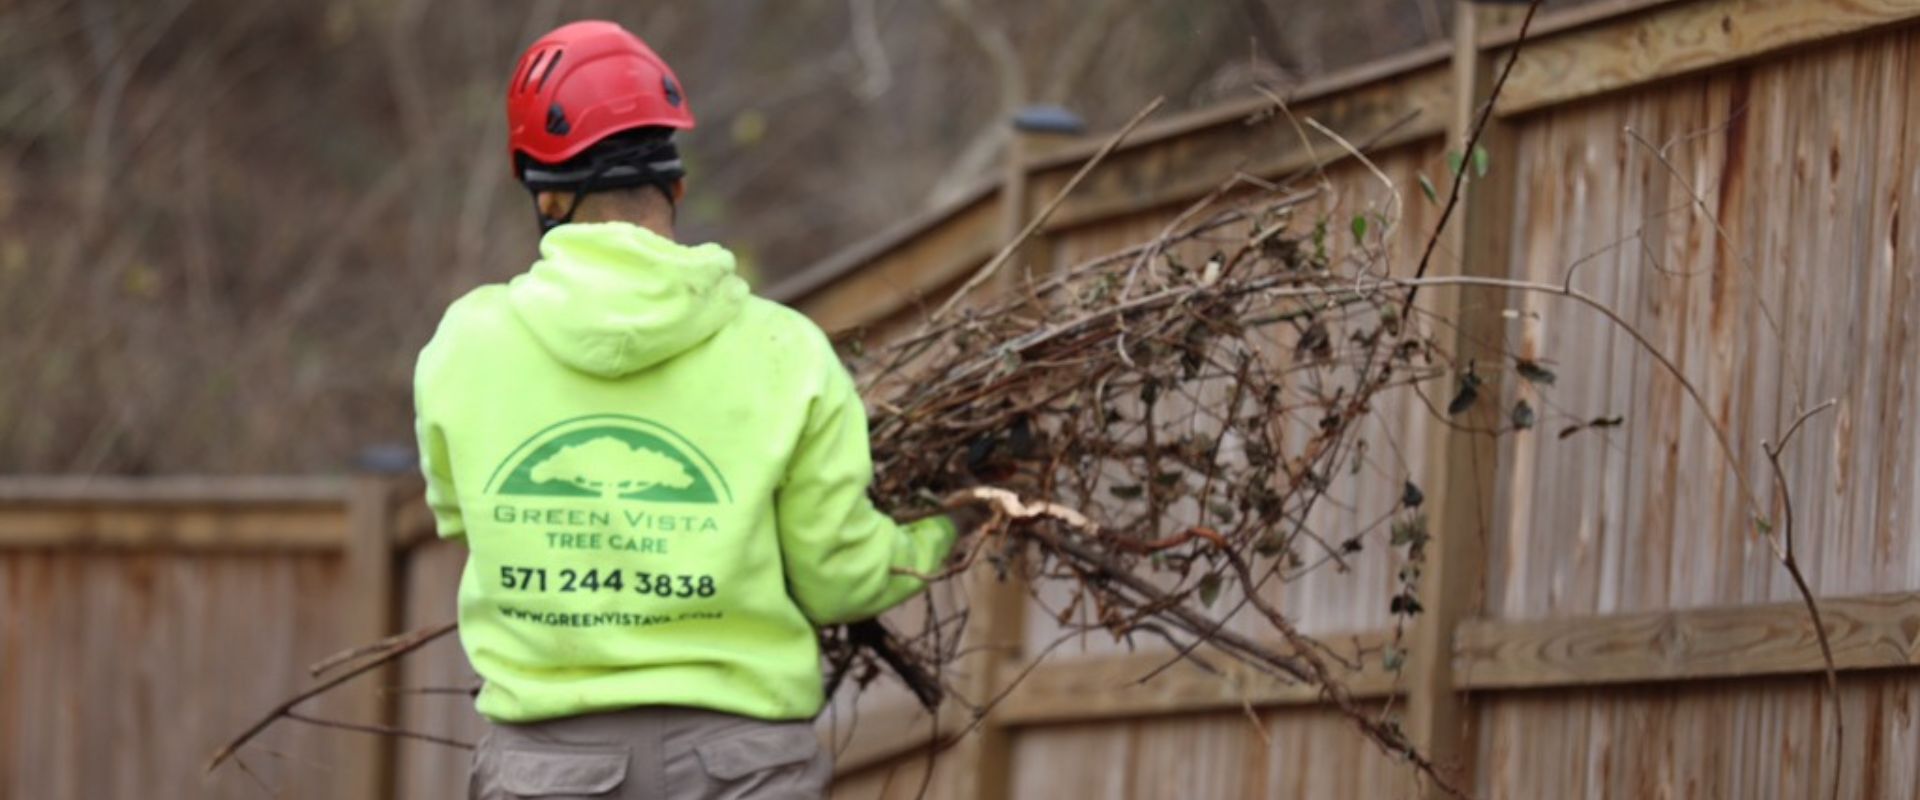 GV-Local-Pages-Vienna-Pruning